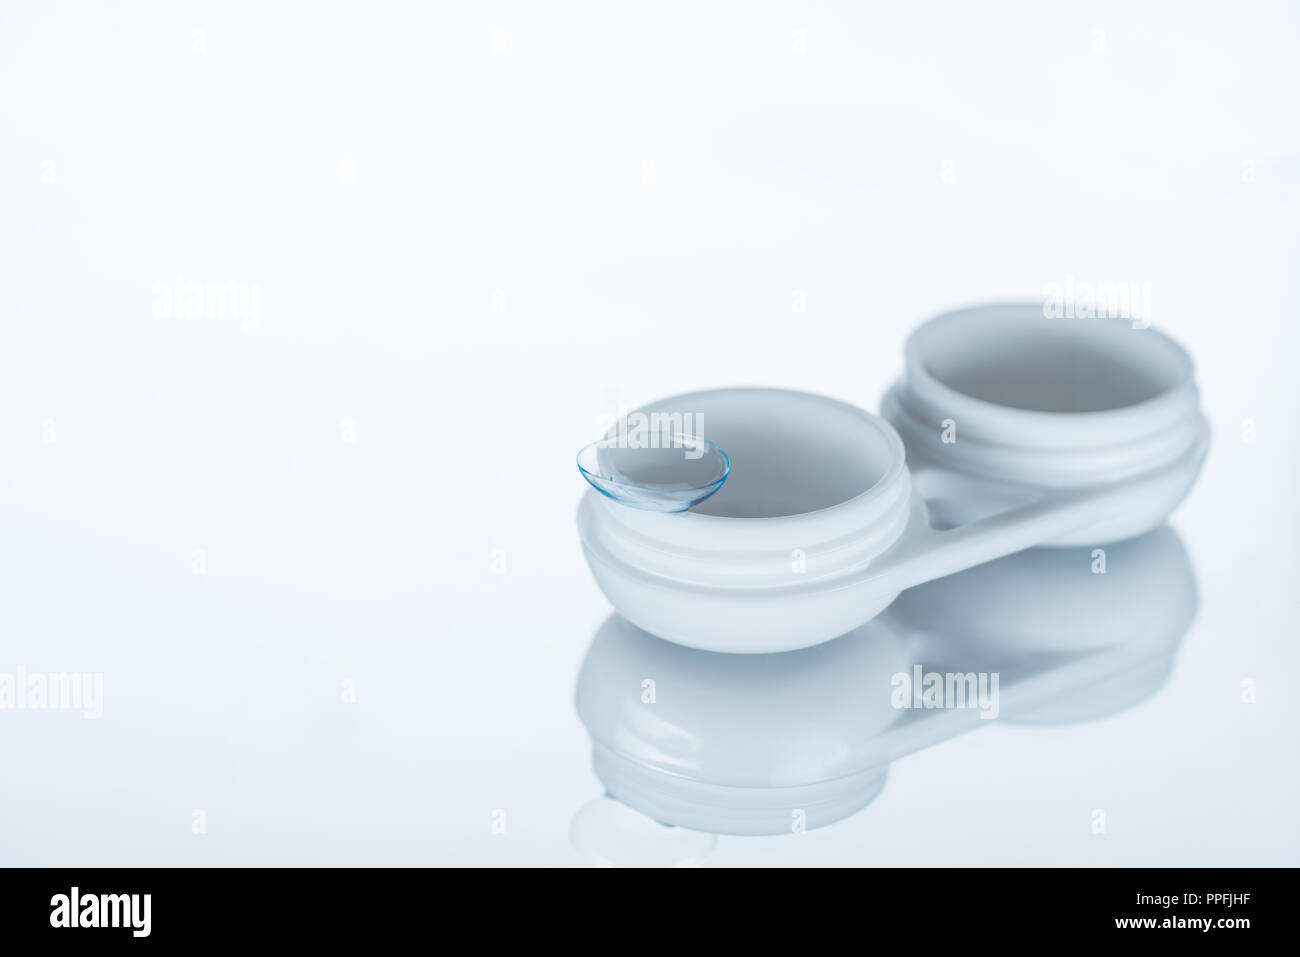 close up view of contact lense and container on white background Stock Photo